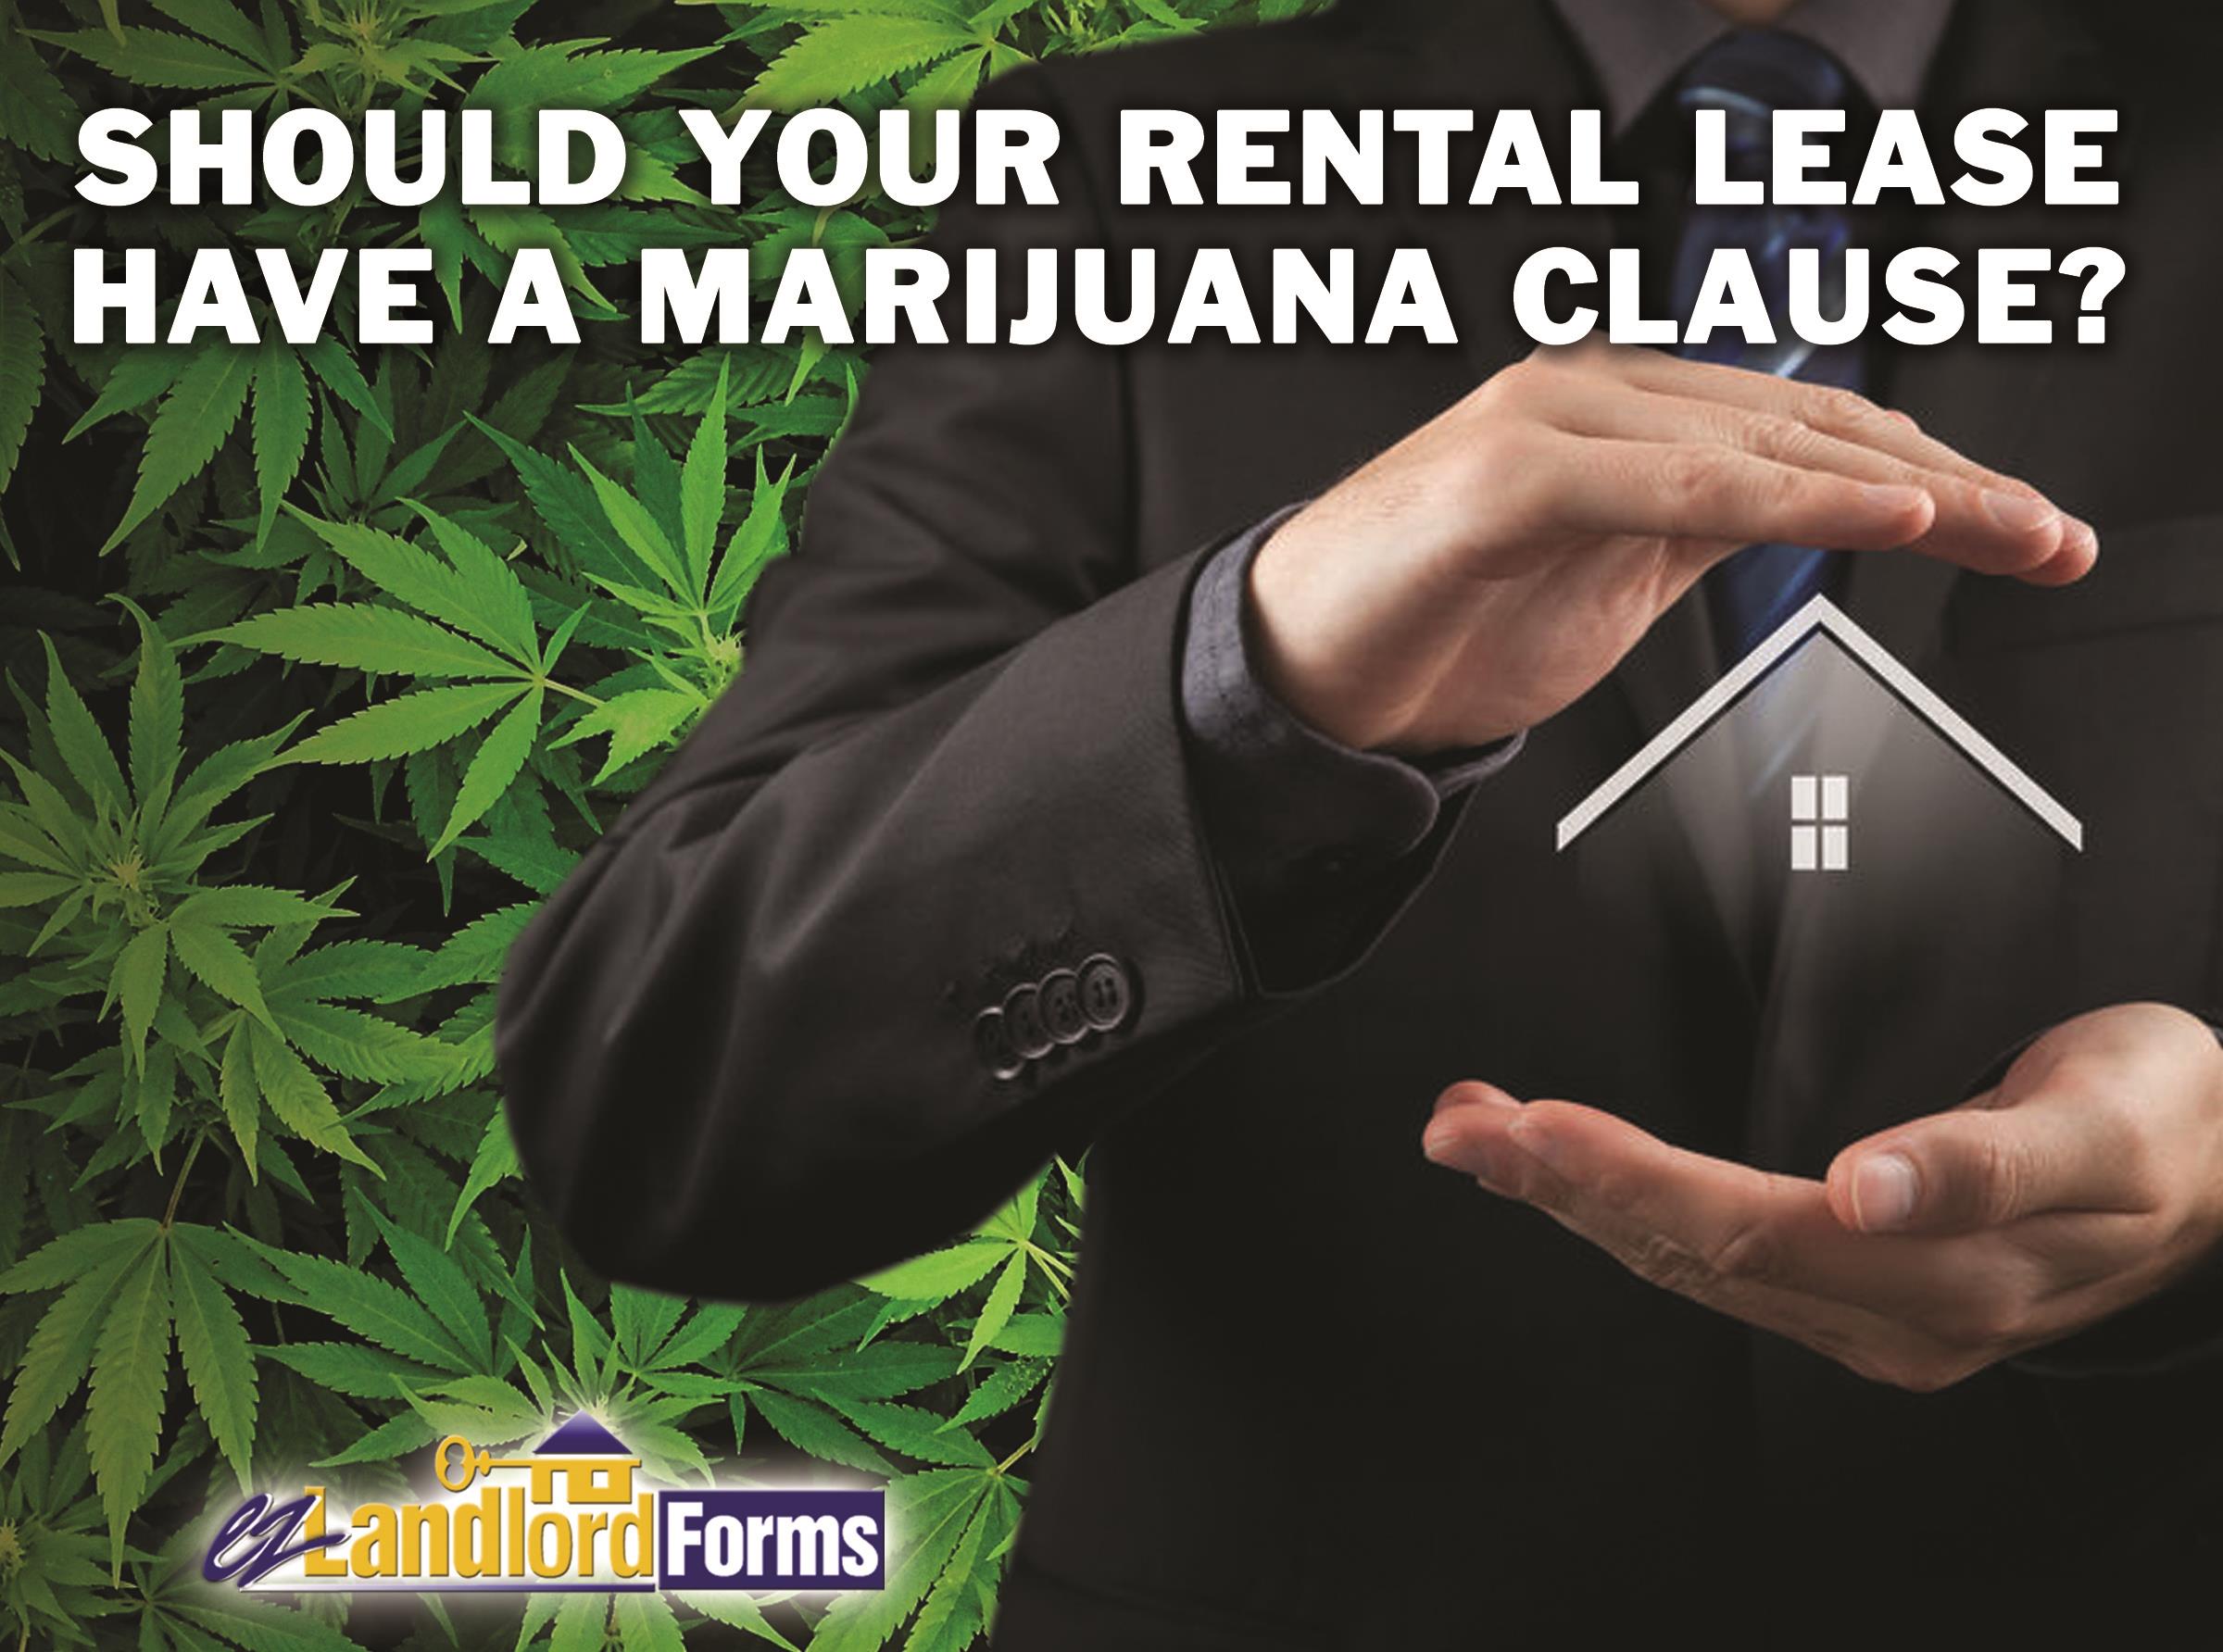 Should_Your_Rental_Lease_Have_a_Marijuana_Clause_V4